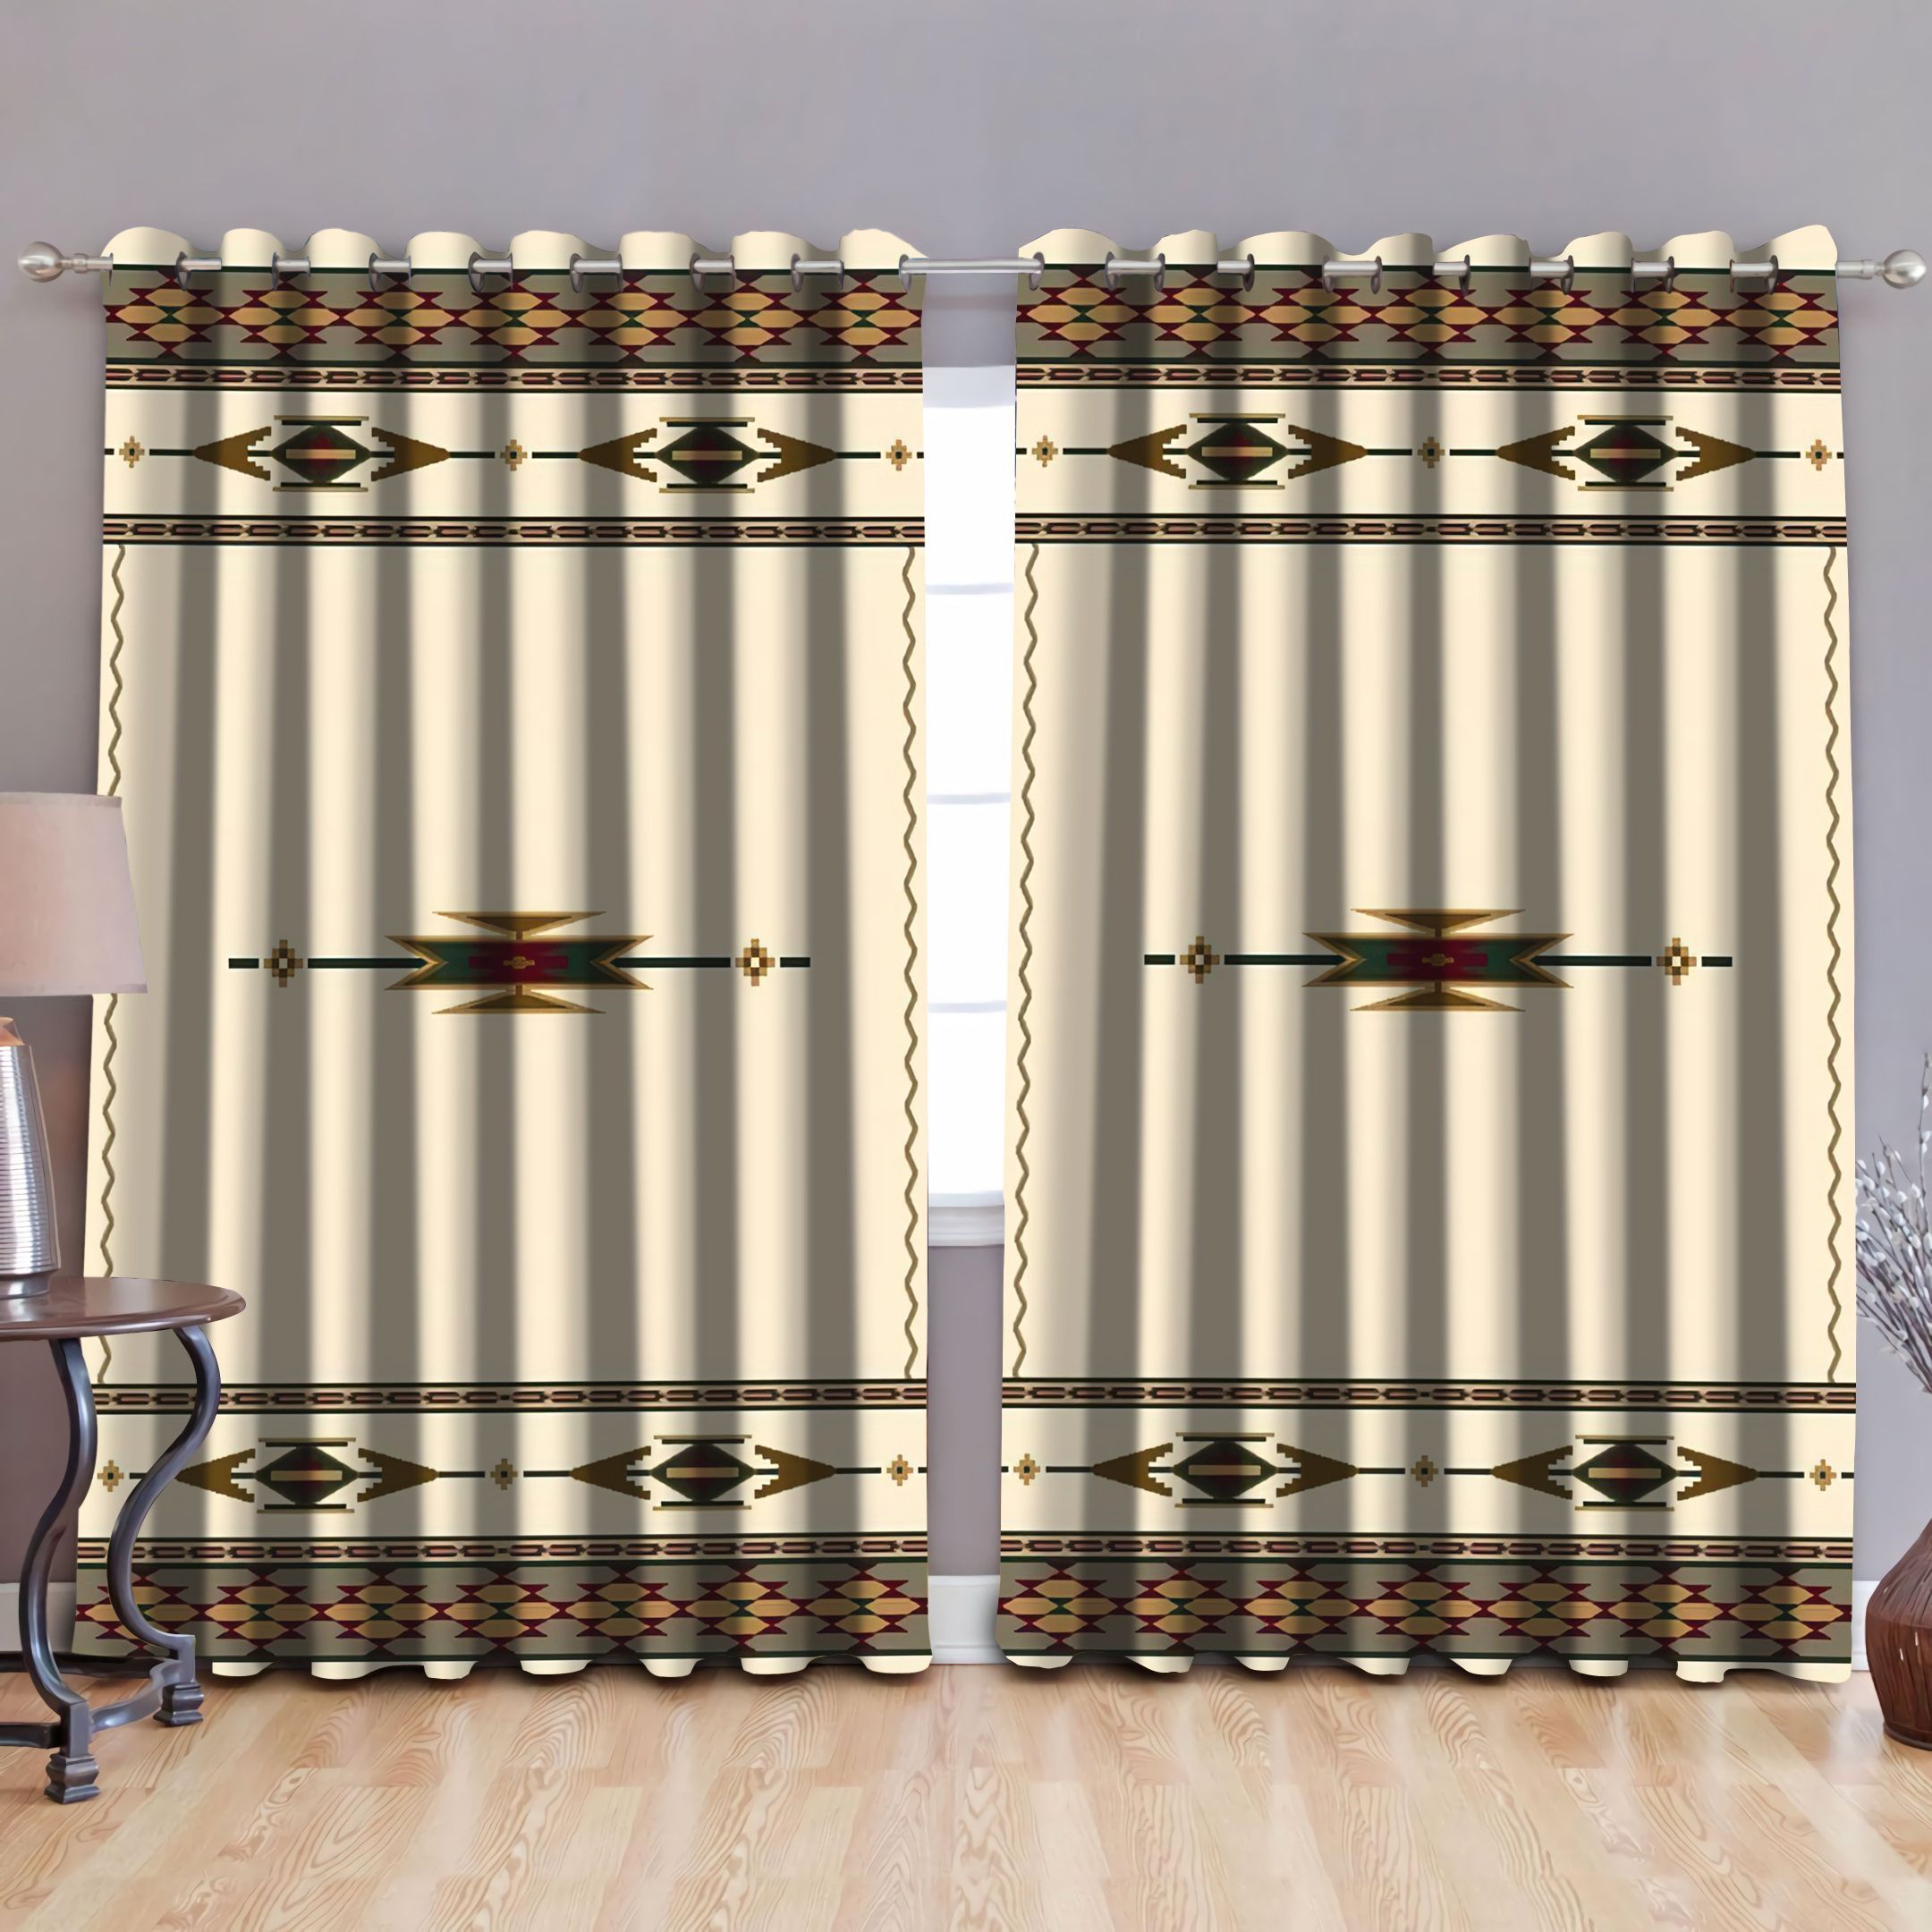 Native American Pattern Abstract Printed Window Curtain